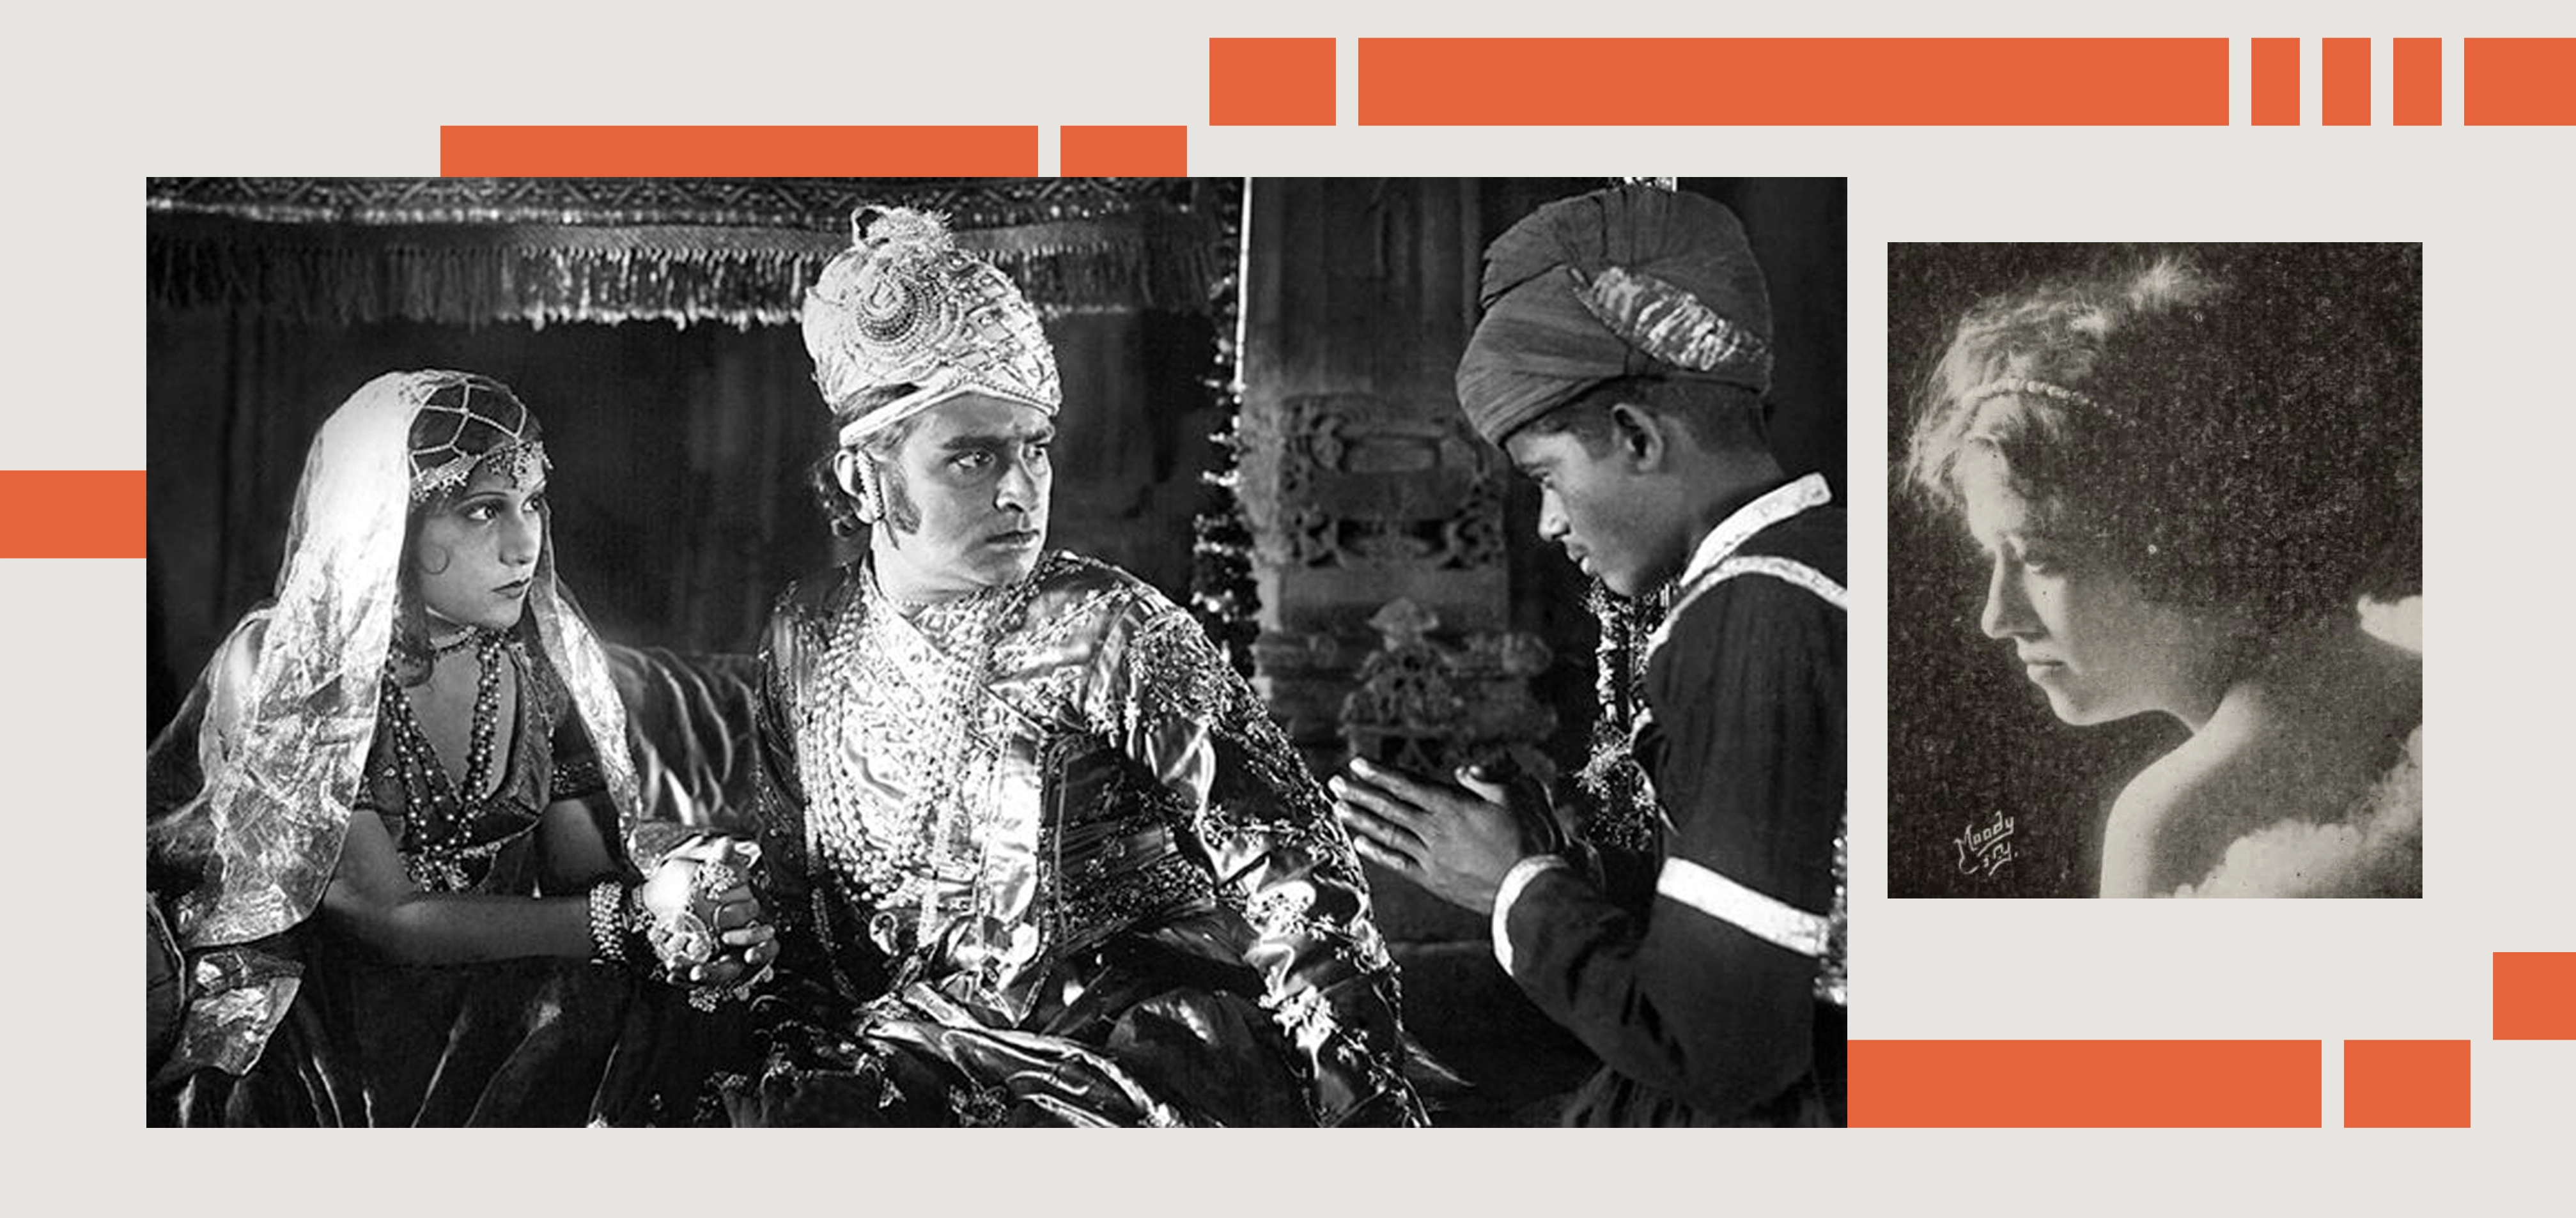 The 1920s to 1940s, Bollywood saw traditional Indian attire in its films, with men wearing classic dhotis and women in draped saris